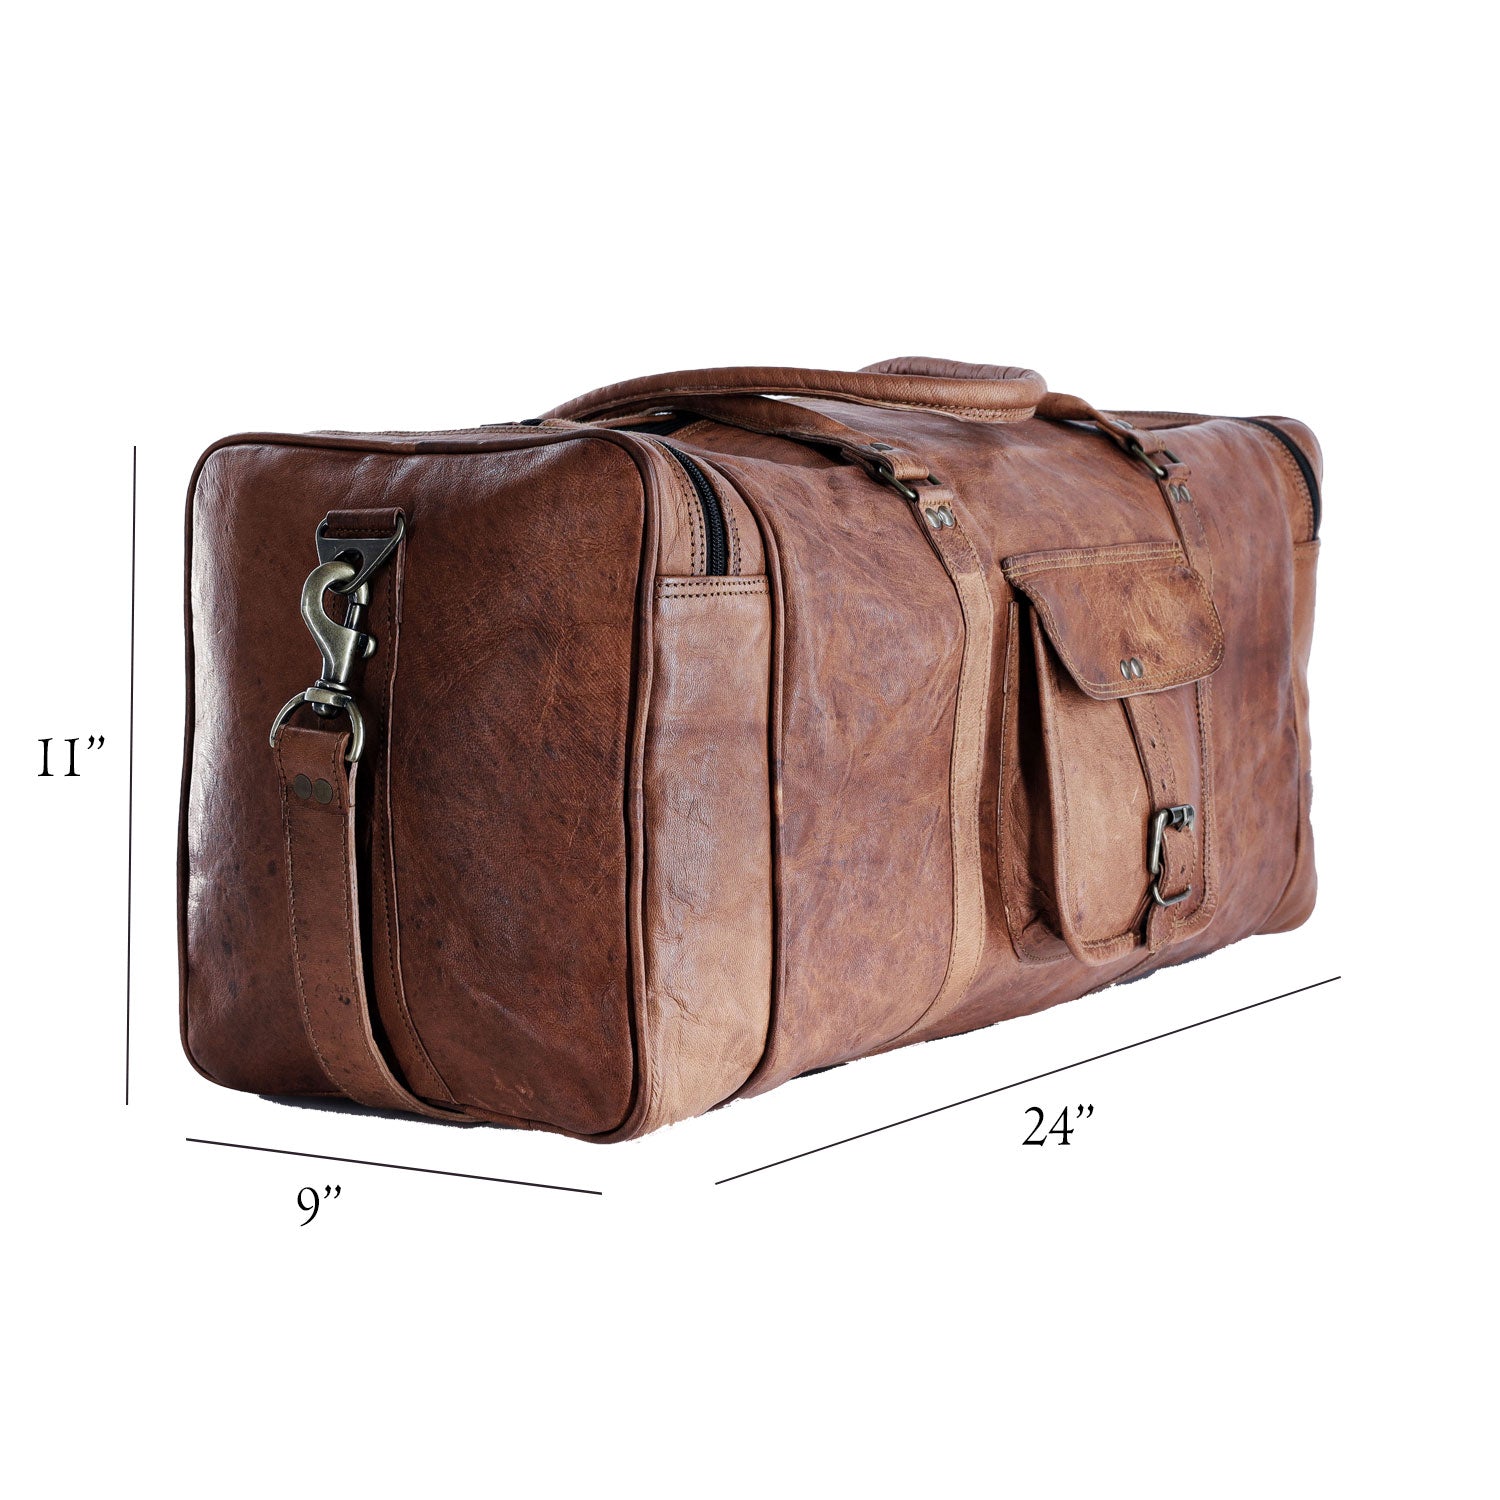 Women's Leather Duffle Bags